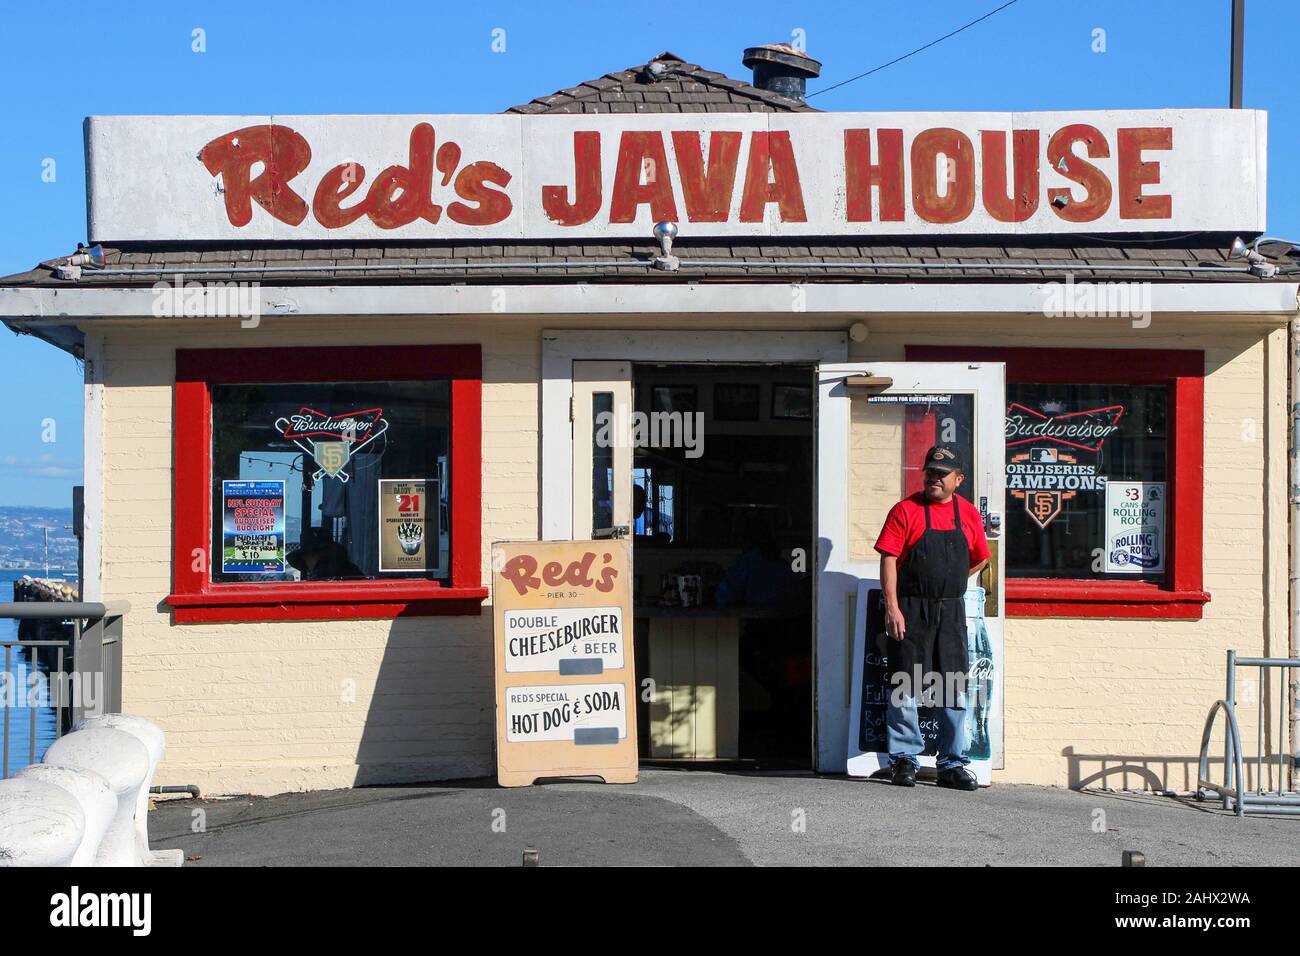 Red's Java House - iconic burger joint opened in 1955 at Pier 30 in South Beach district of San Francisco, United States of America Stock Photo